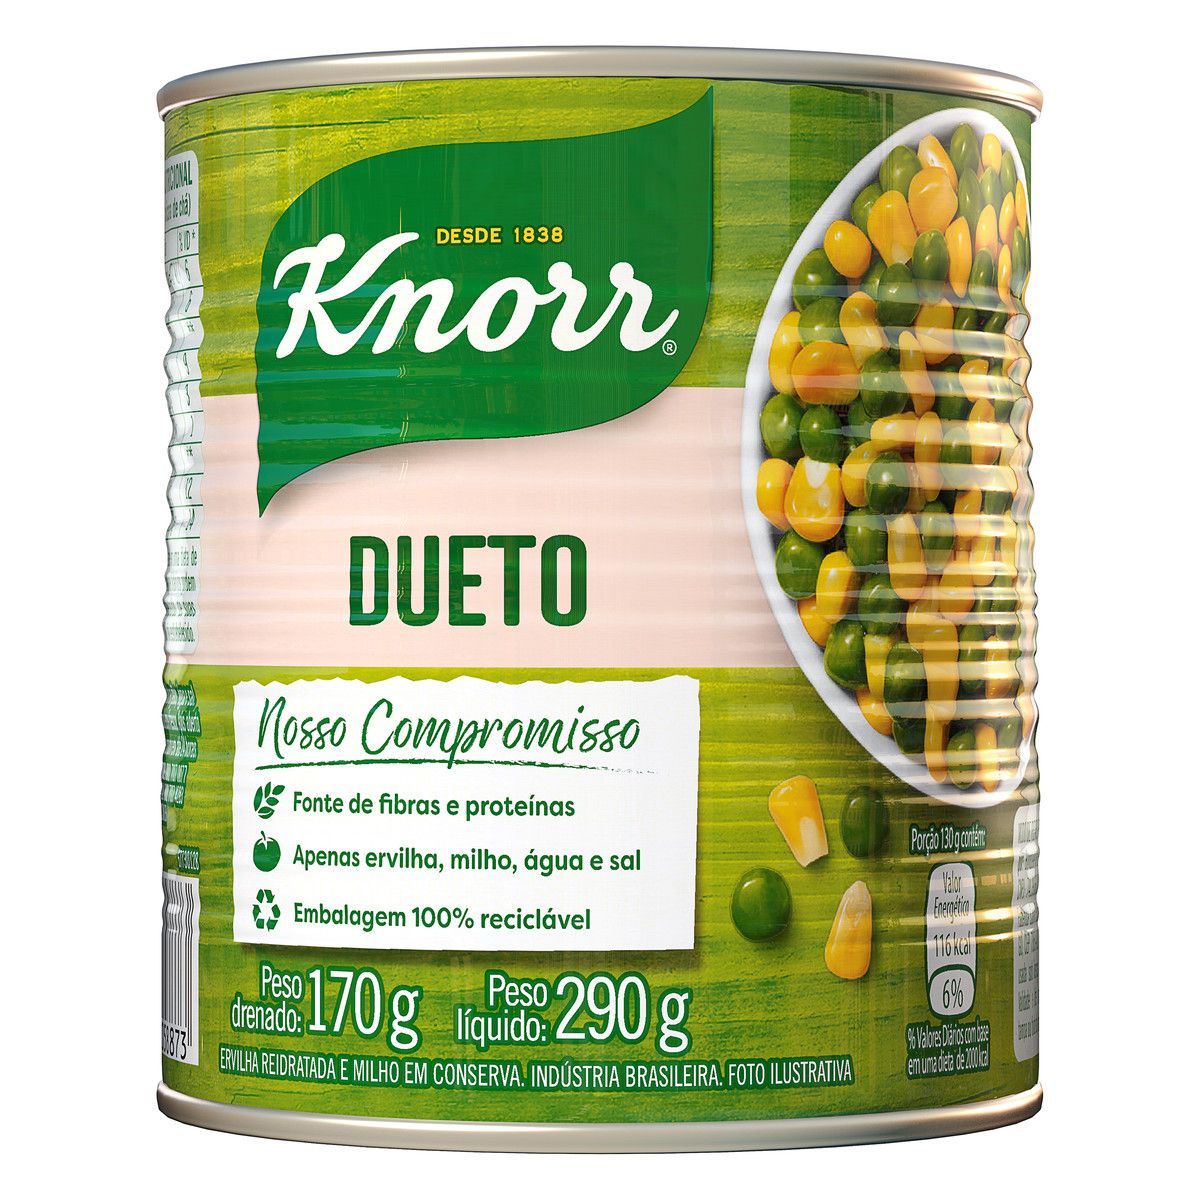 Dueto Knorr 170g